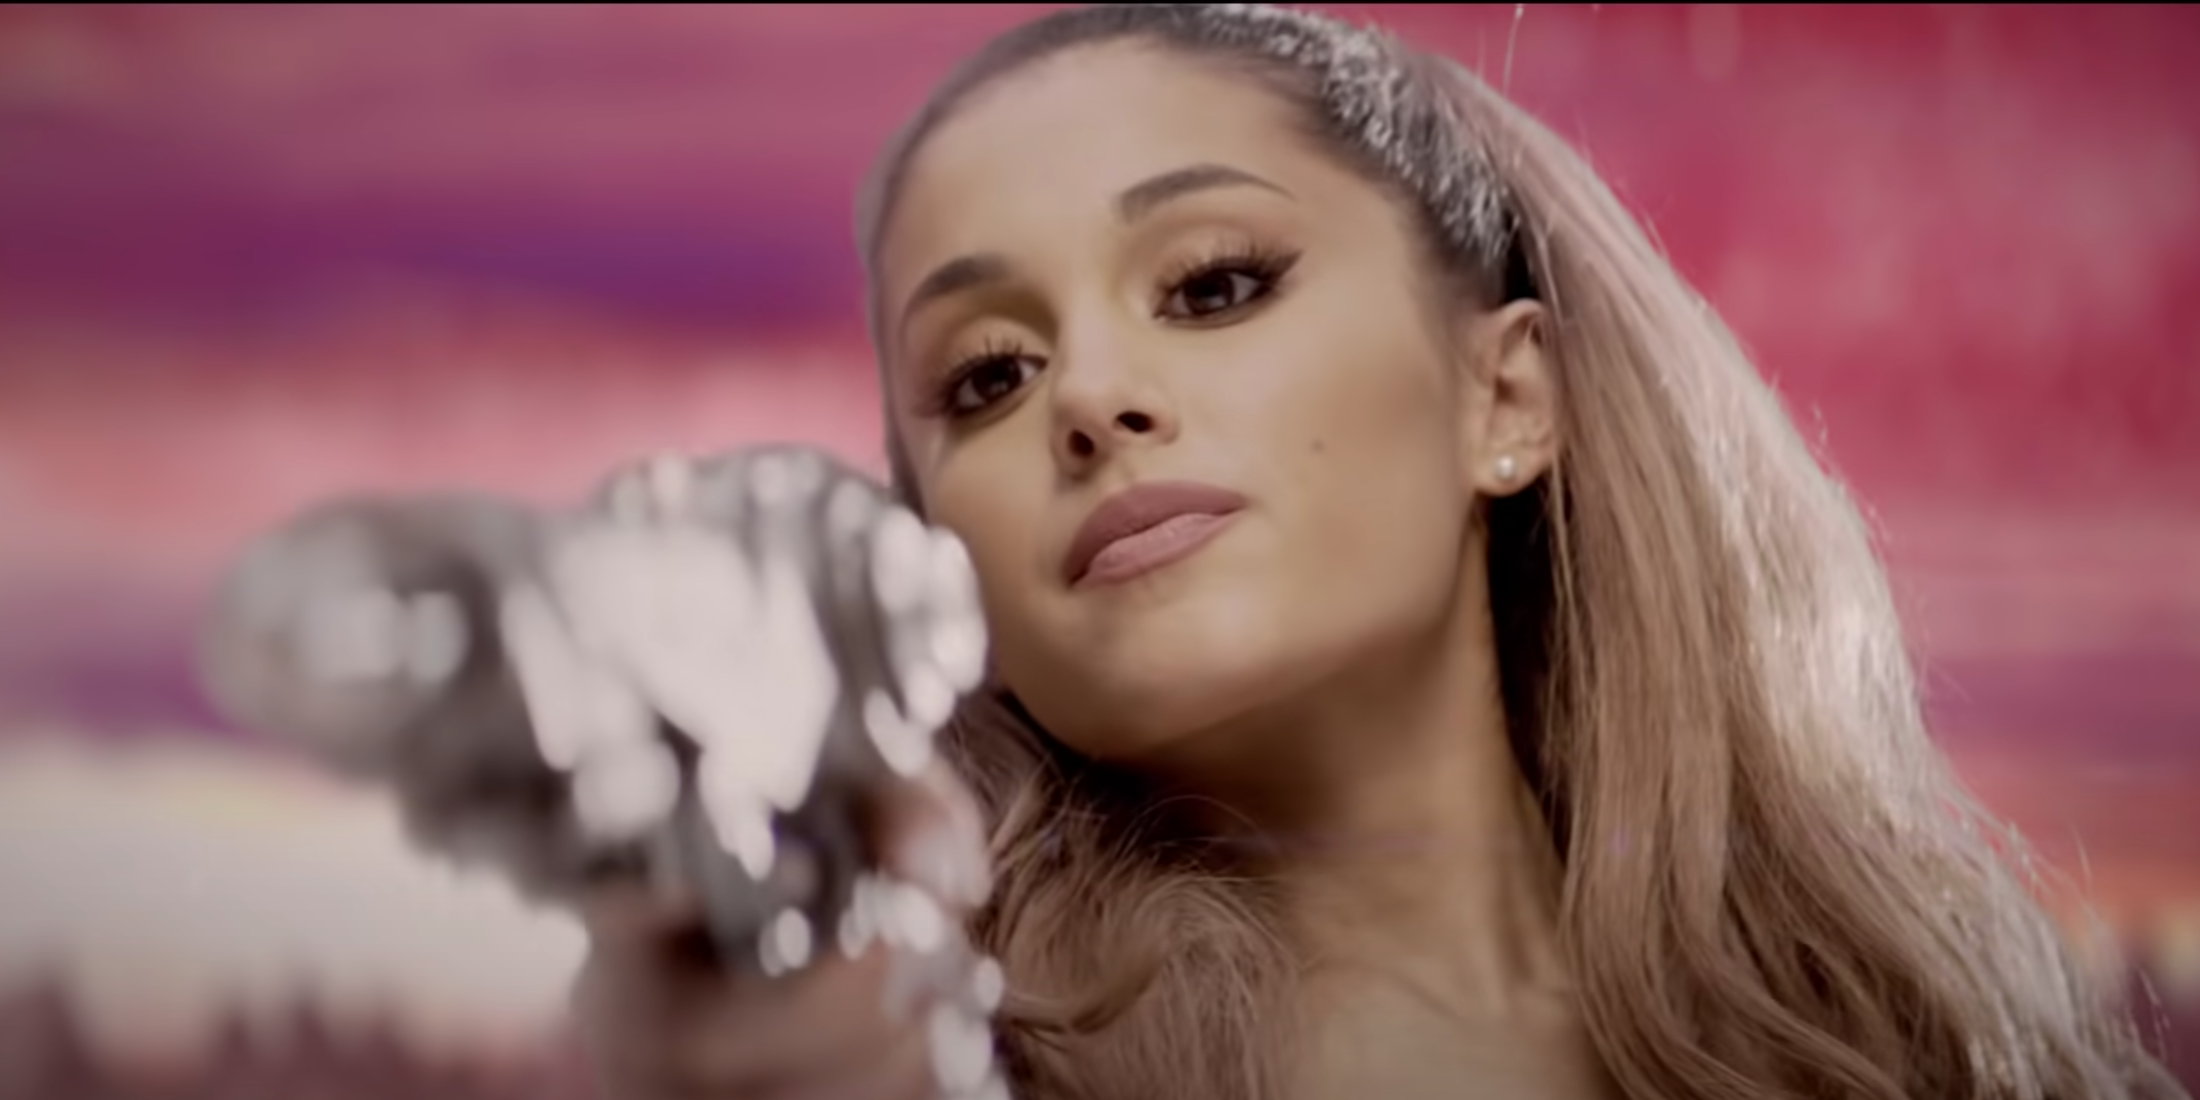 An image of Ariana Grande pointing a ray gun at the camera in the music video for Break Free.